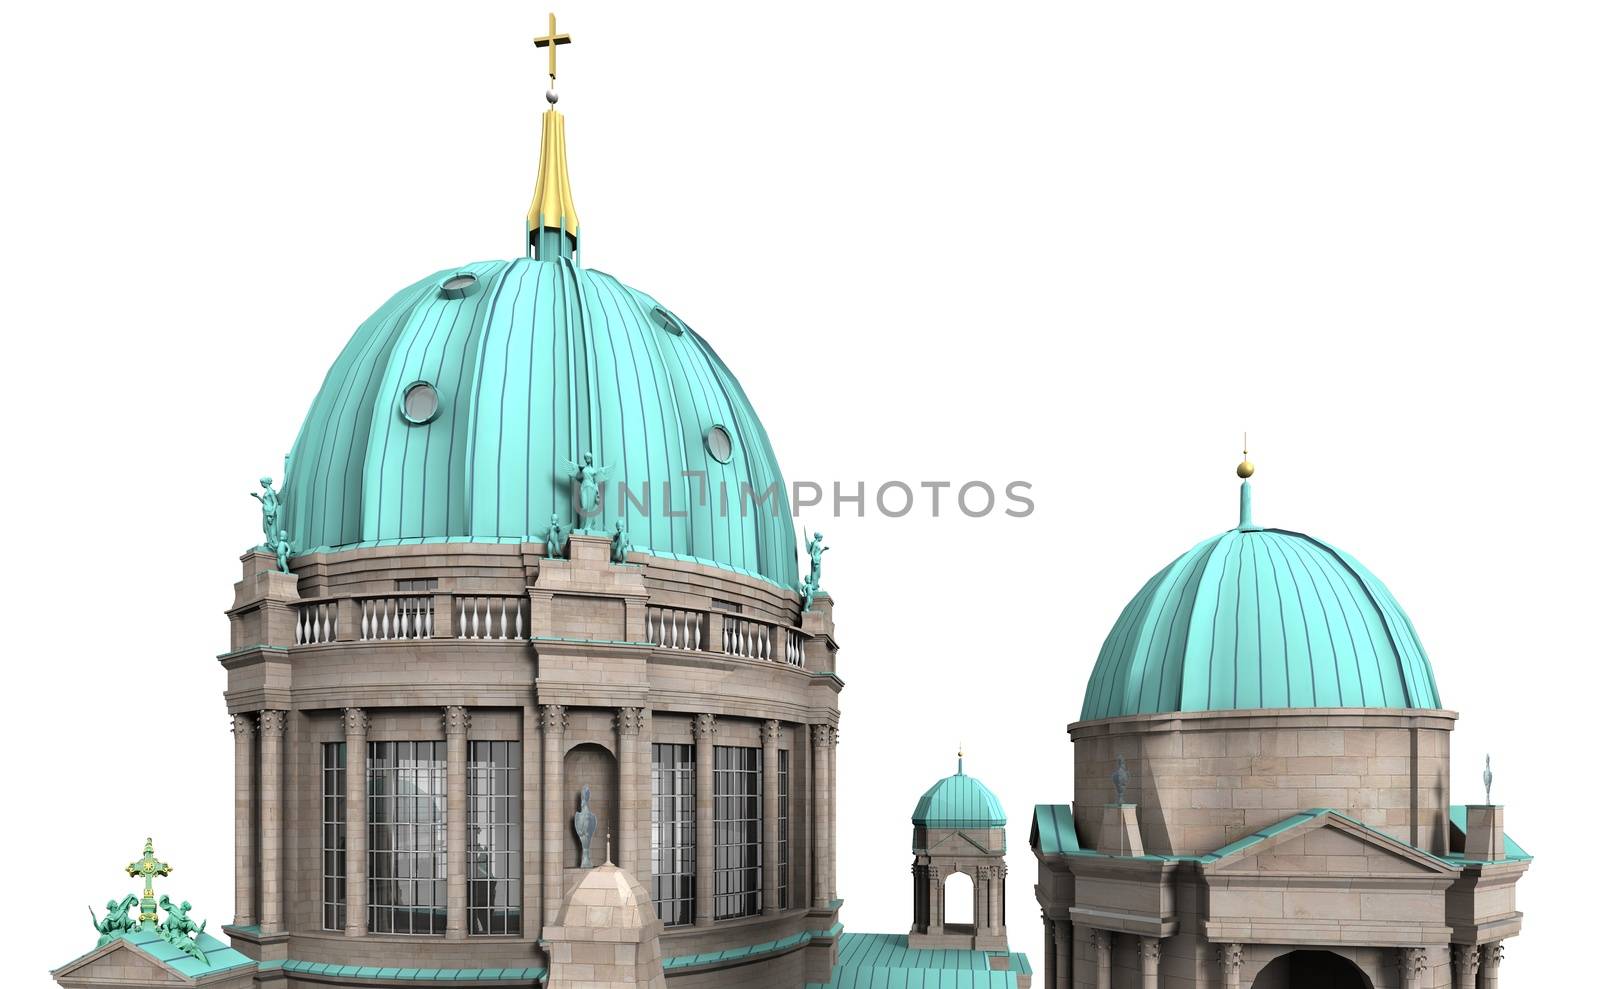 The Berlin Cathedral is the largest church in Berlin there sees itself as a central place of the Evangelical Church in Germany.